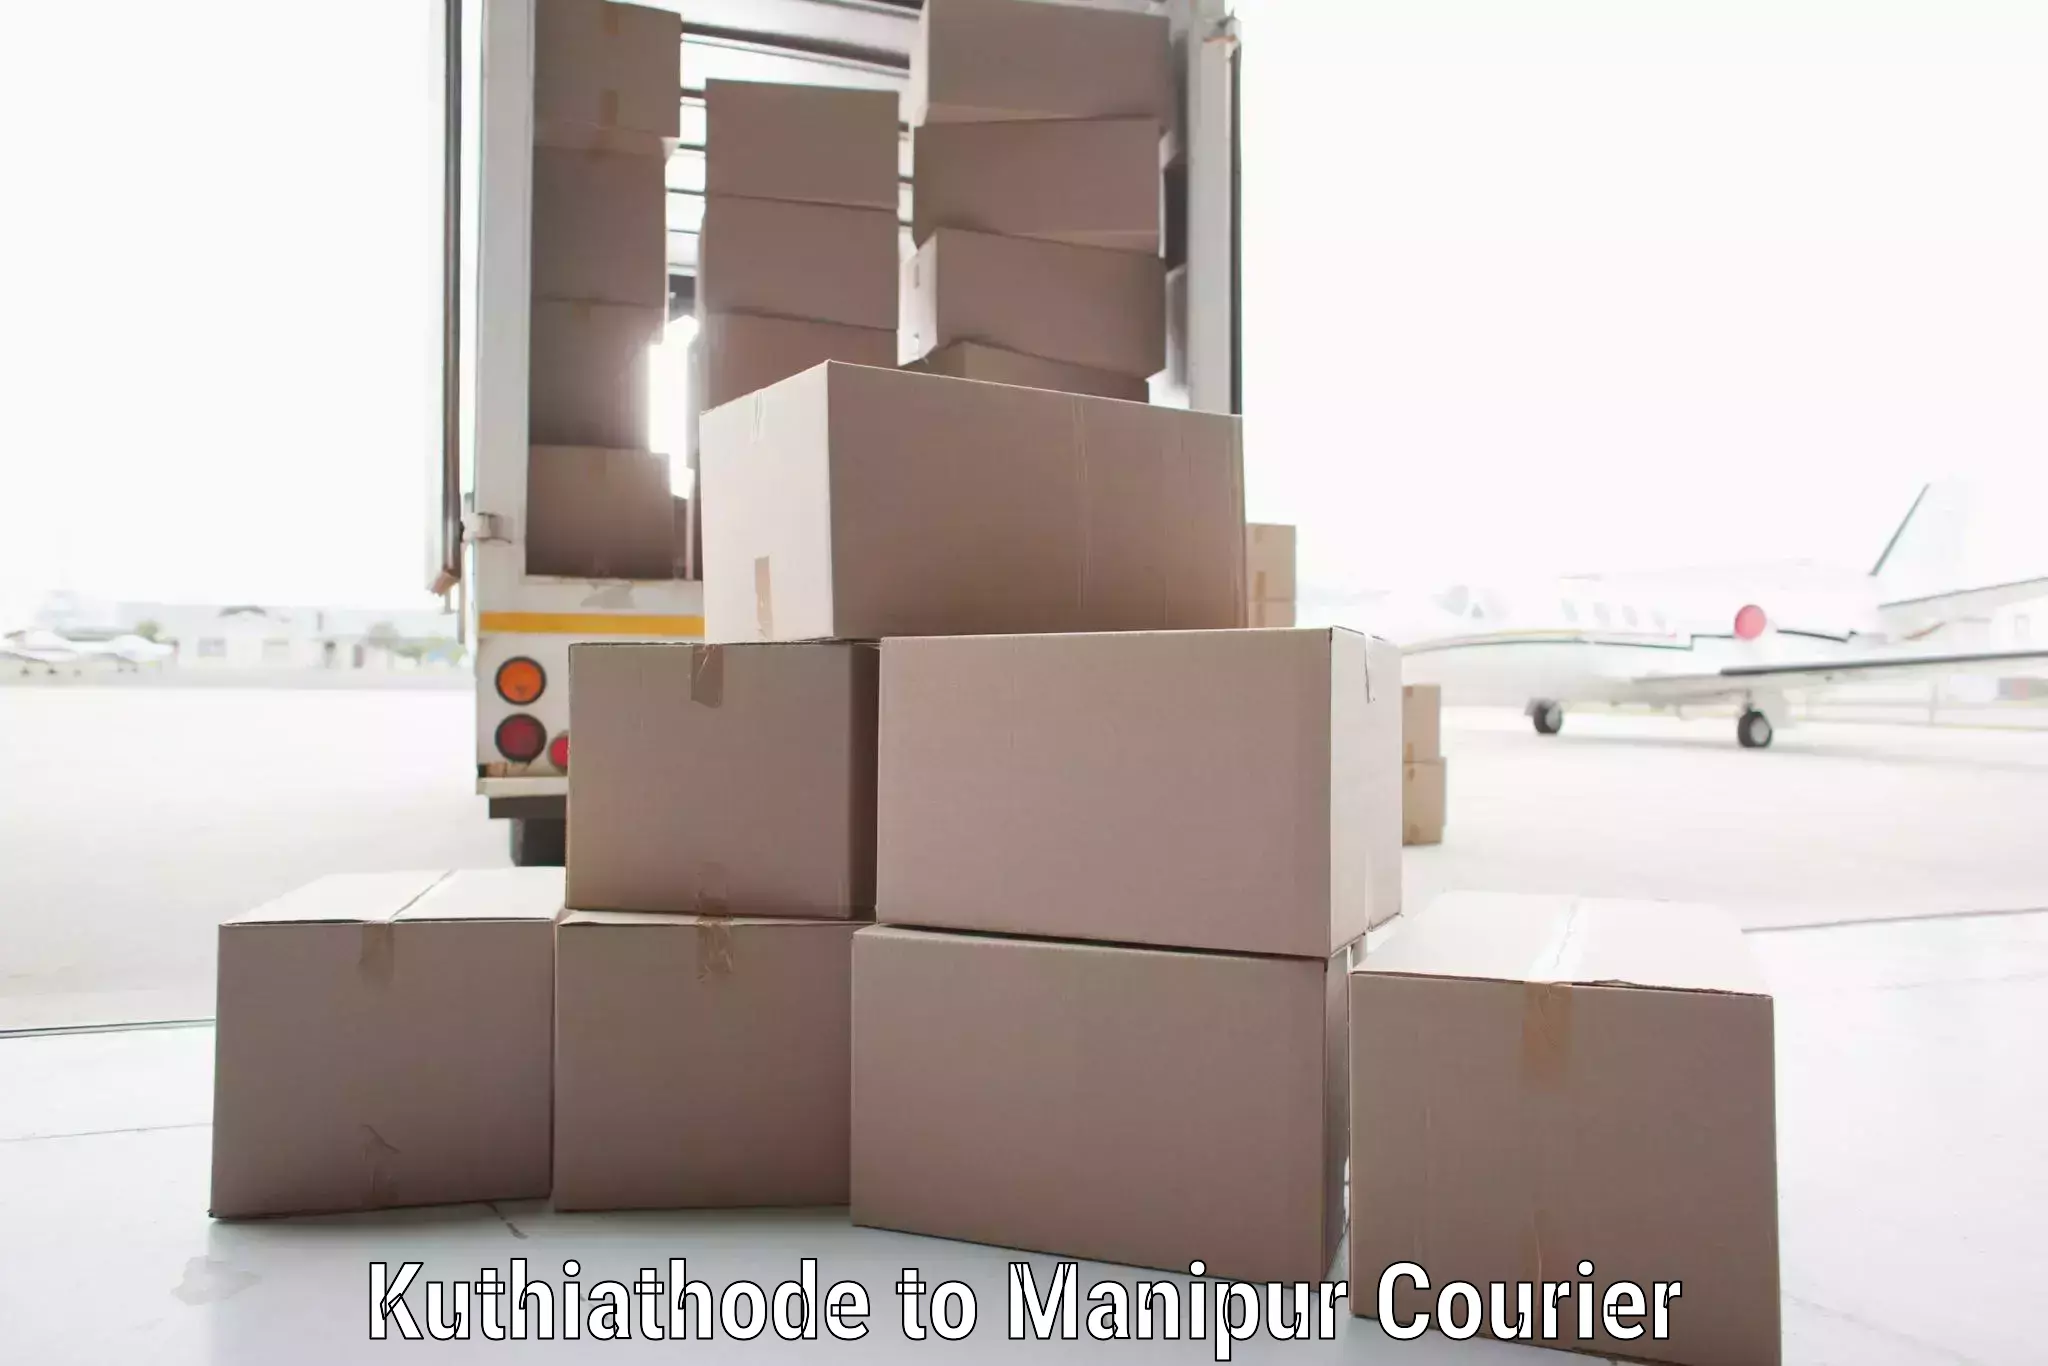 Round-the-clock parcel delivery Kuthiathode to Manipur